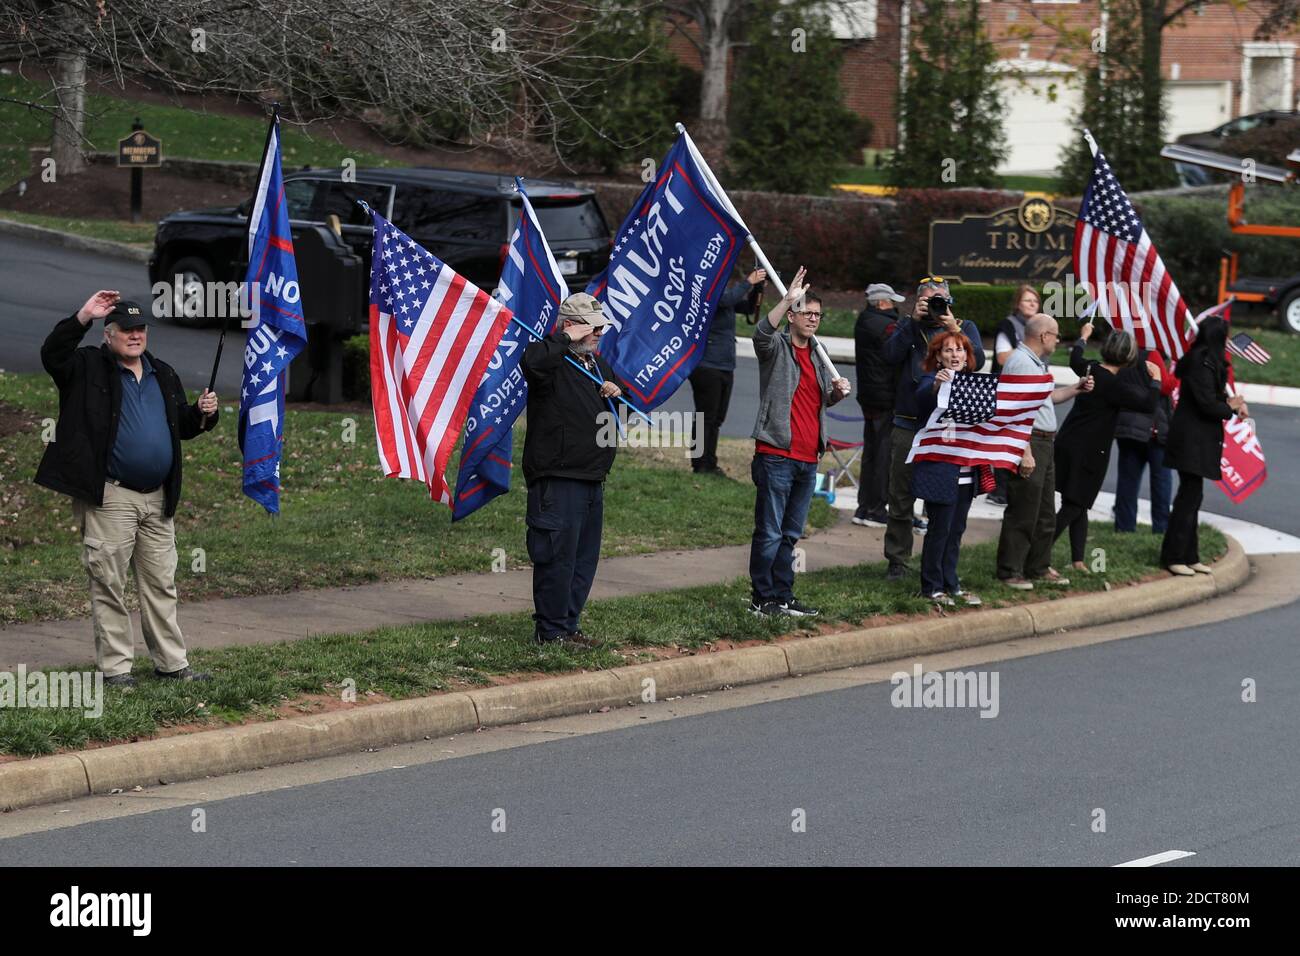 Demonstrators gather outside of the Trump National Golf Club Washington DC in Sterling, Virginia, on Sunday, November 22, 2020 in Washington, DC.Credit: Oliver Contreras/Pool via CNP /MediaPunch Stock Photo